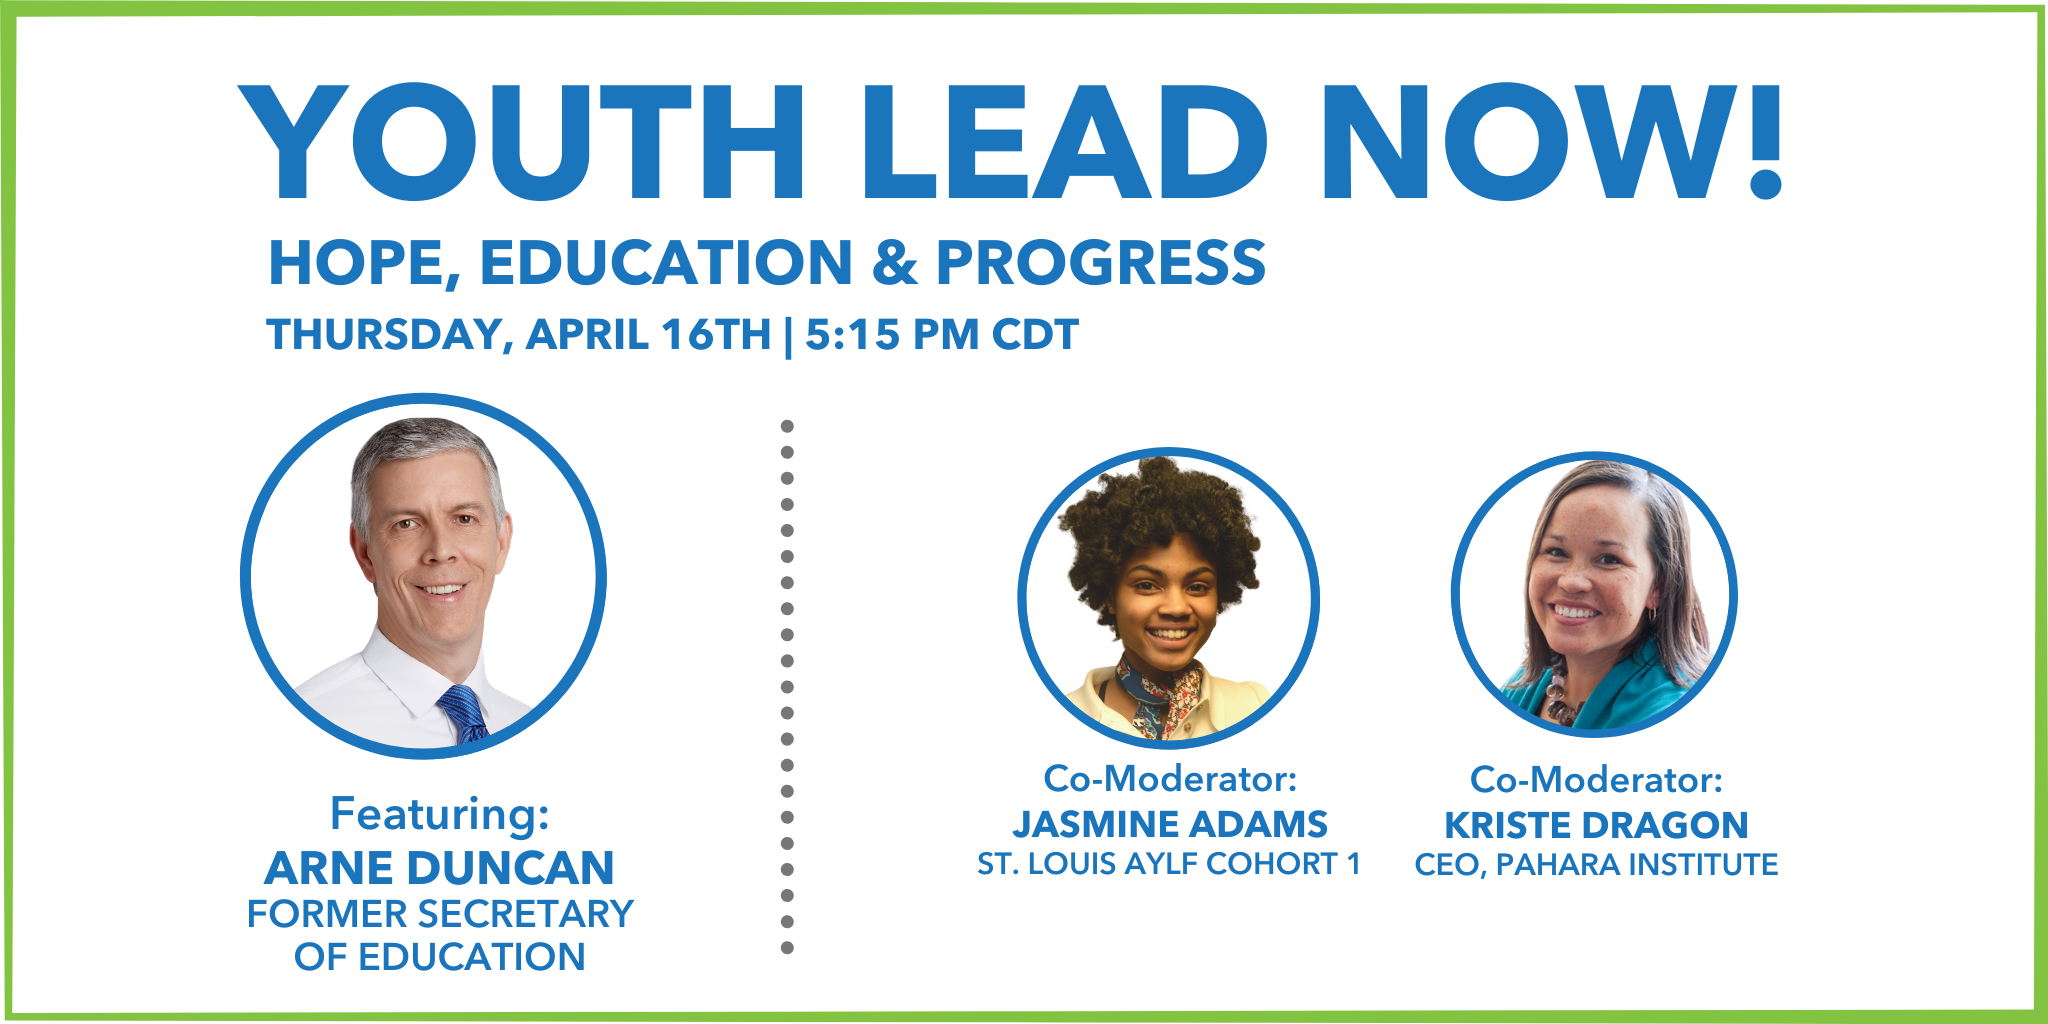 Youth Lead Now! Hope, Education, & Pathways to Progress